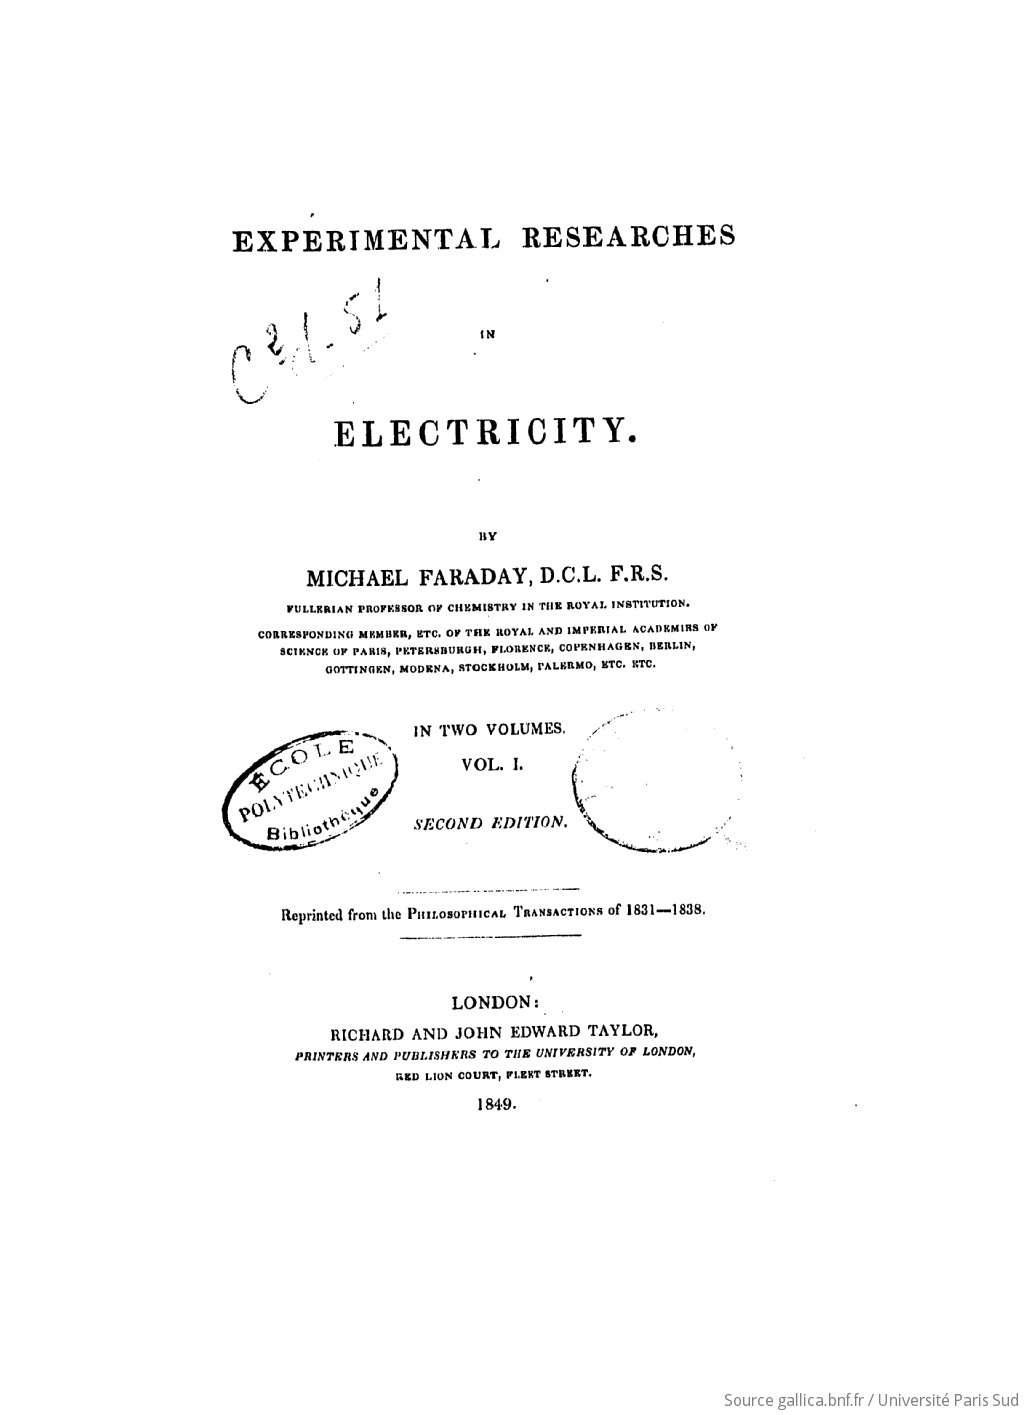 Experimental Researches in Electricity: Faraday, Michael